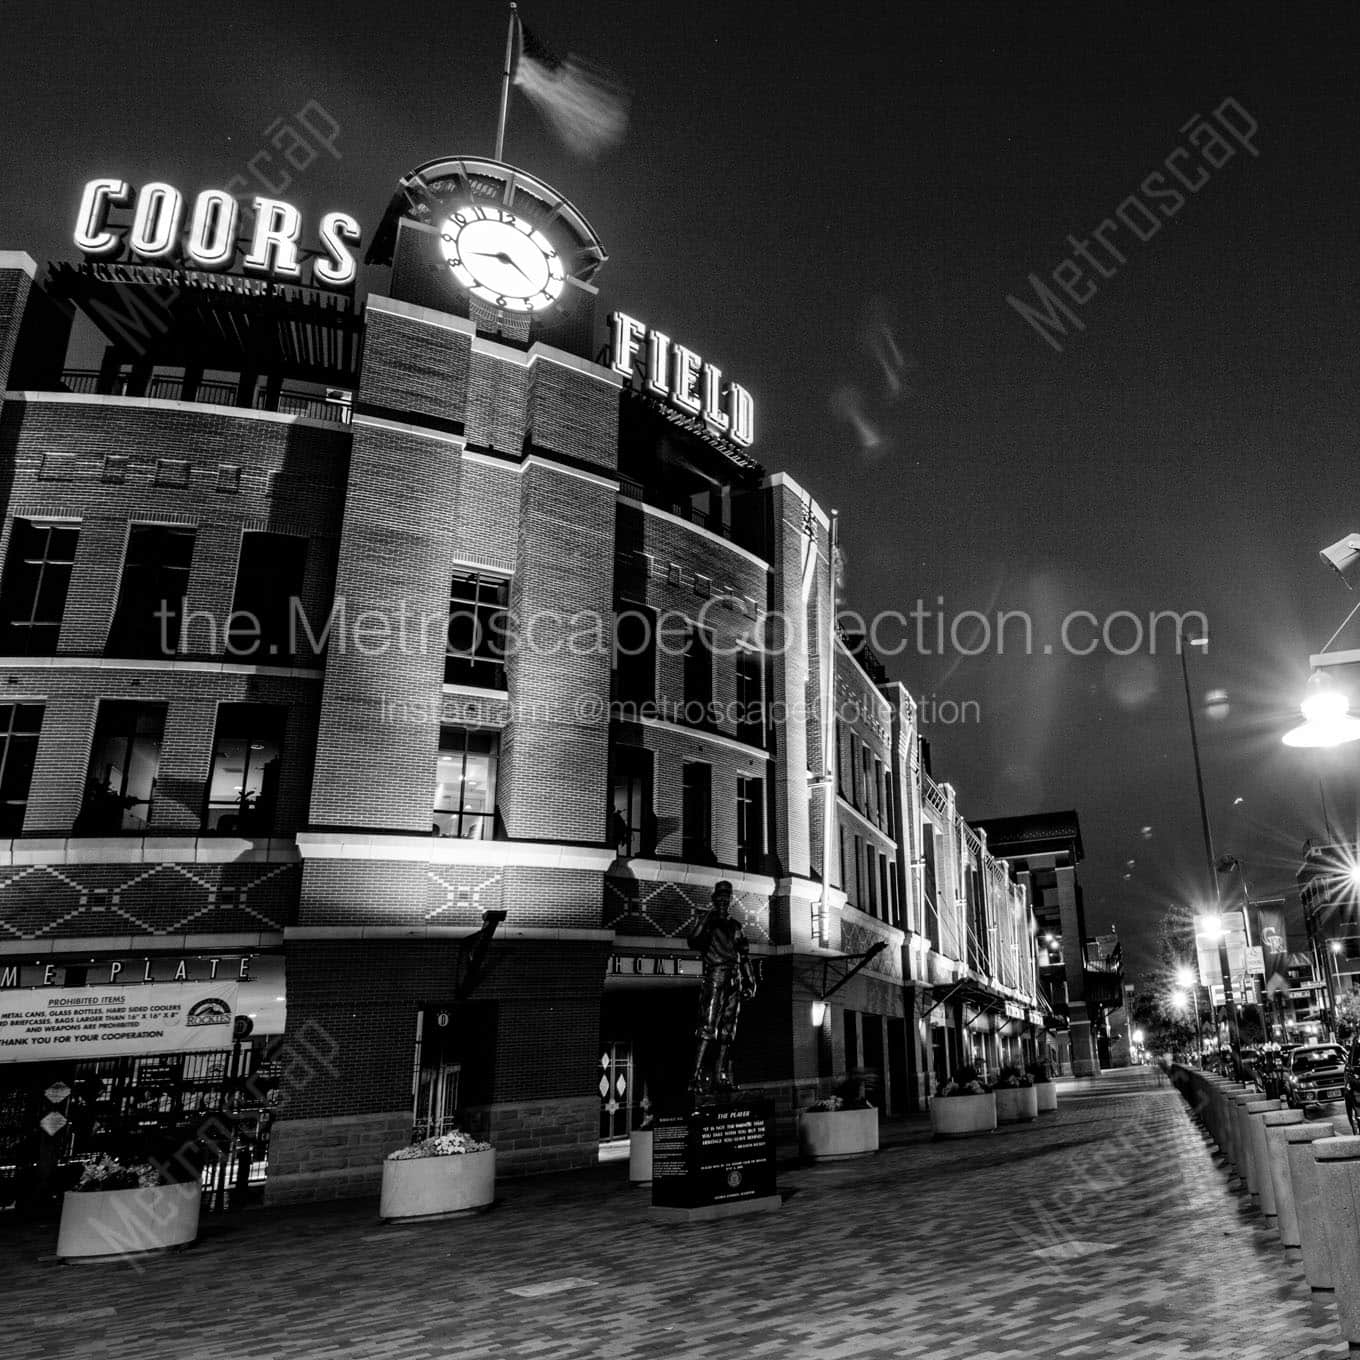 coors field at night Black & White Office Art